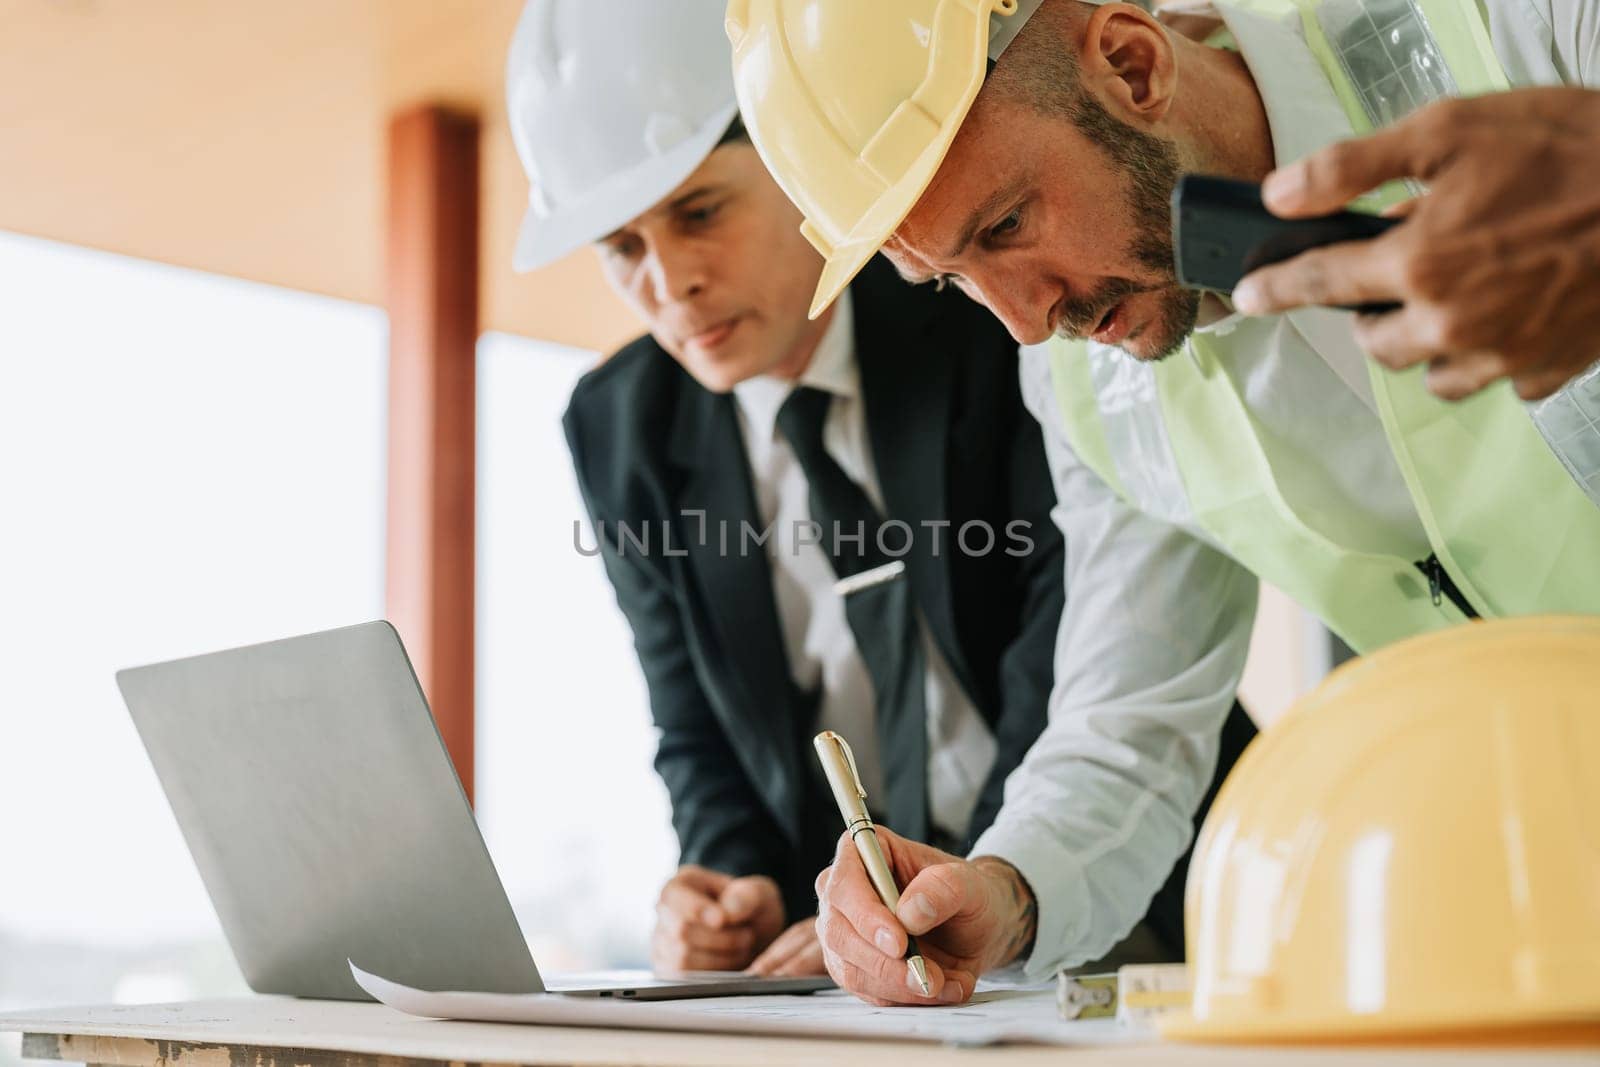 multi ethnic engineer brainstorming and measuring for cost estimating on blueprint and floor plan drawings about design architectural and engineering for houses and buildings.